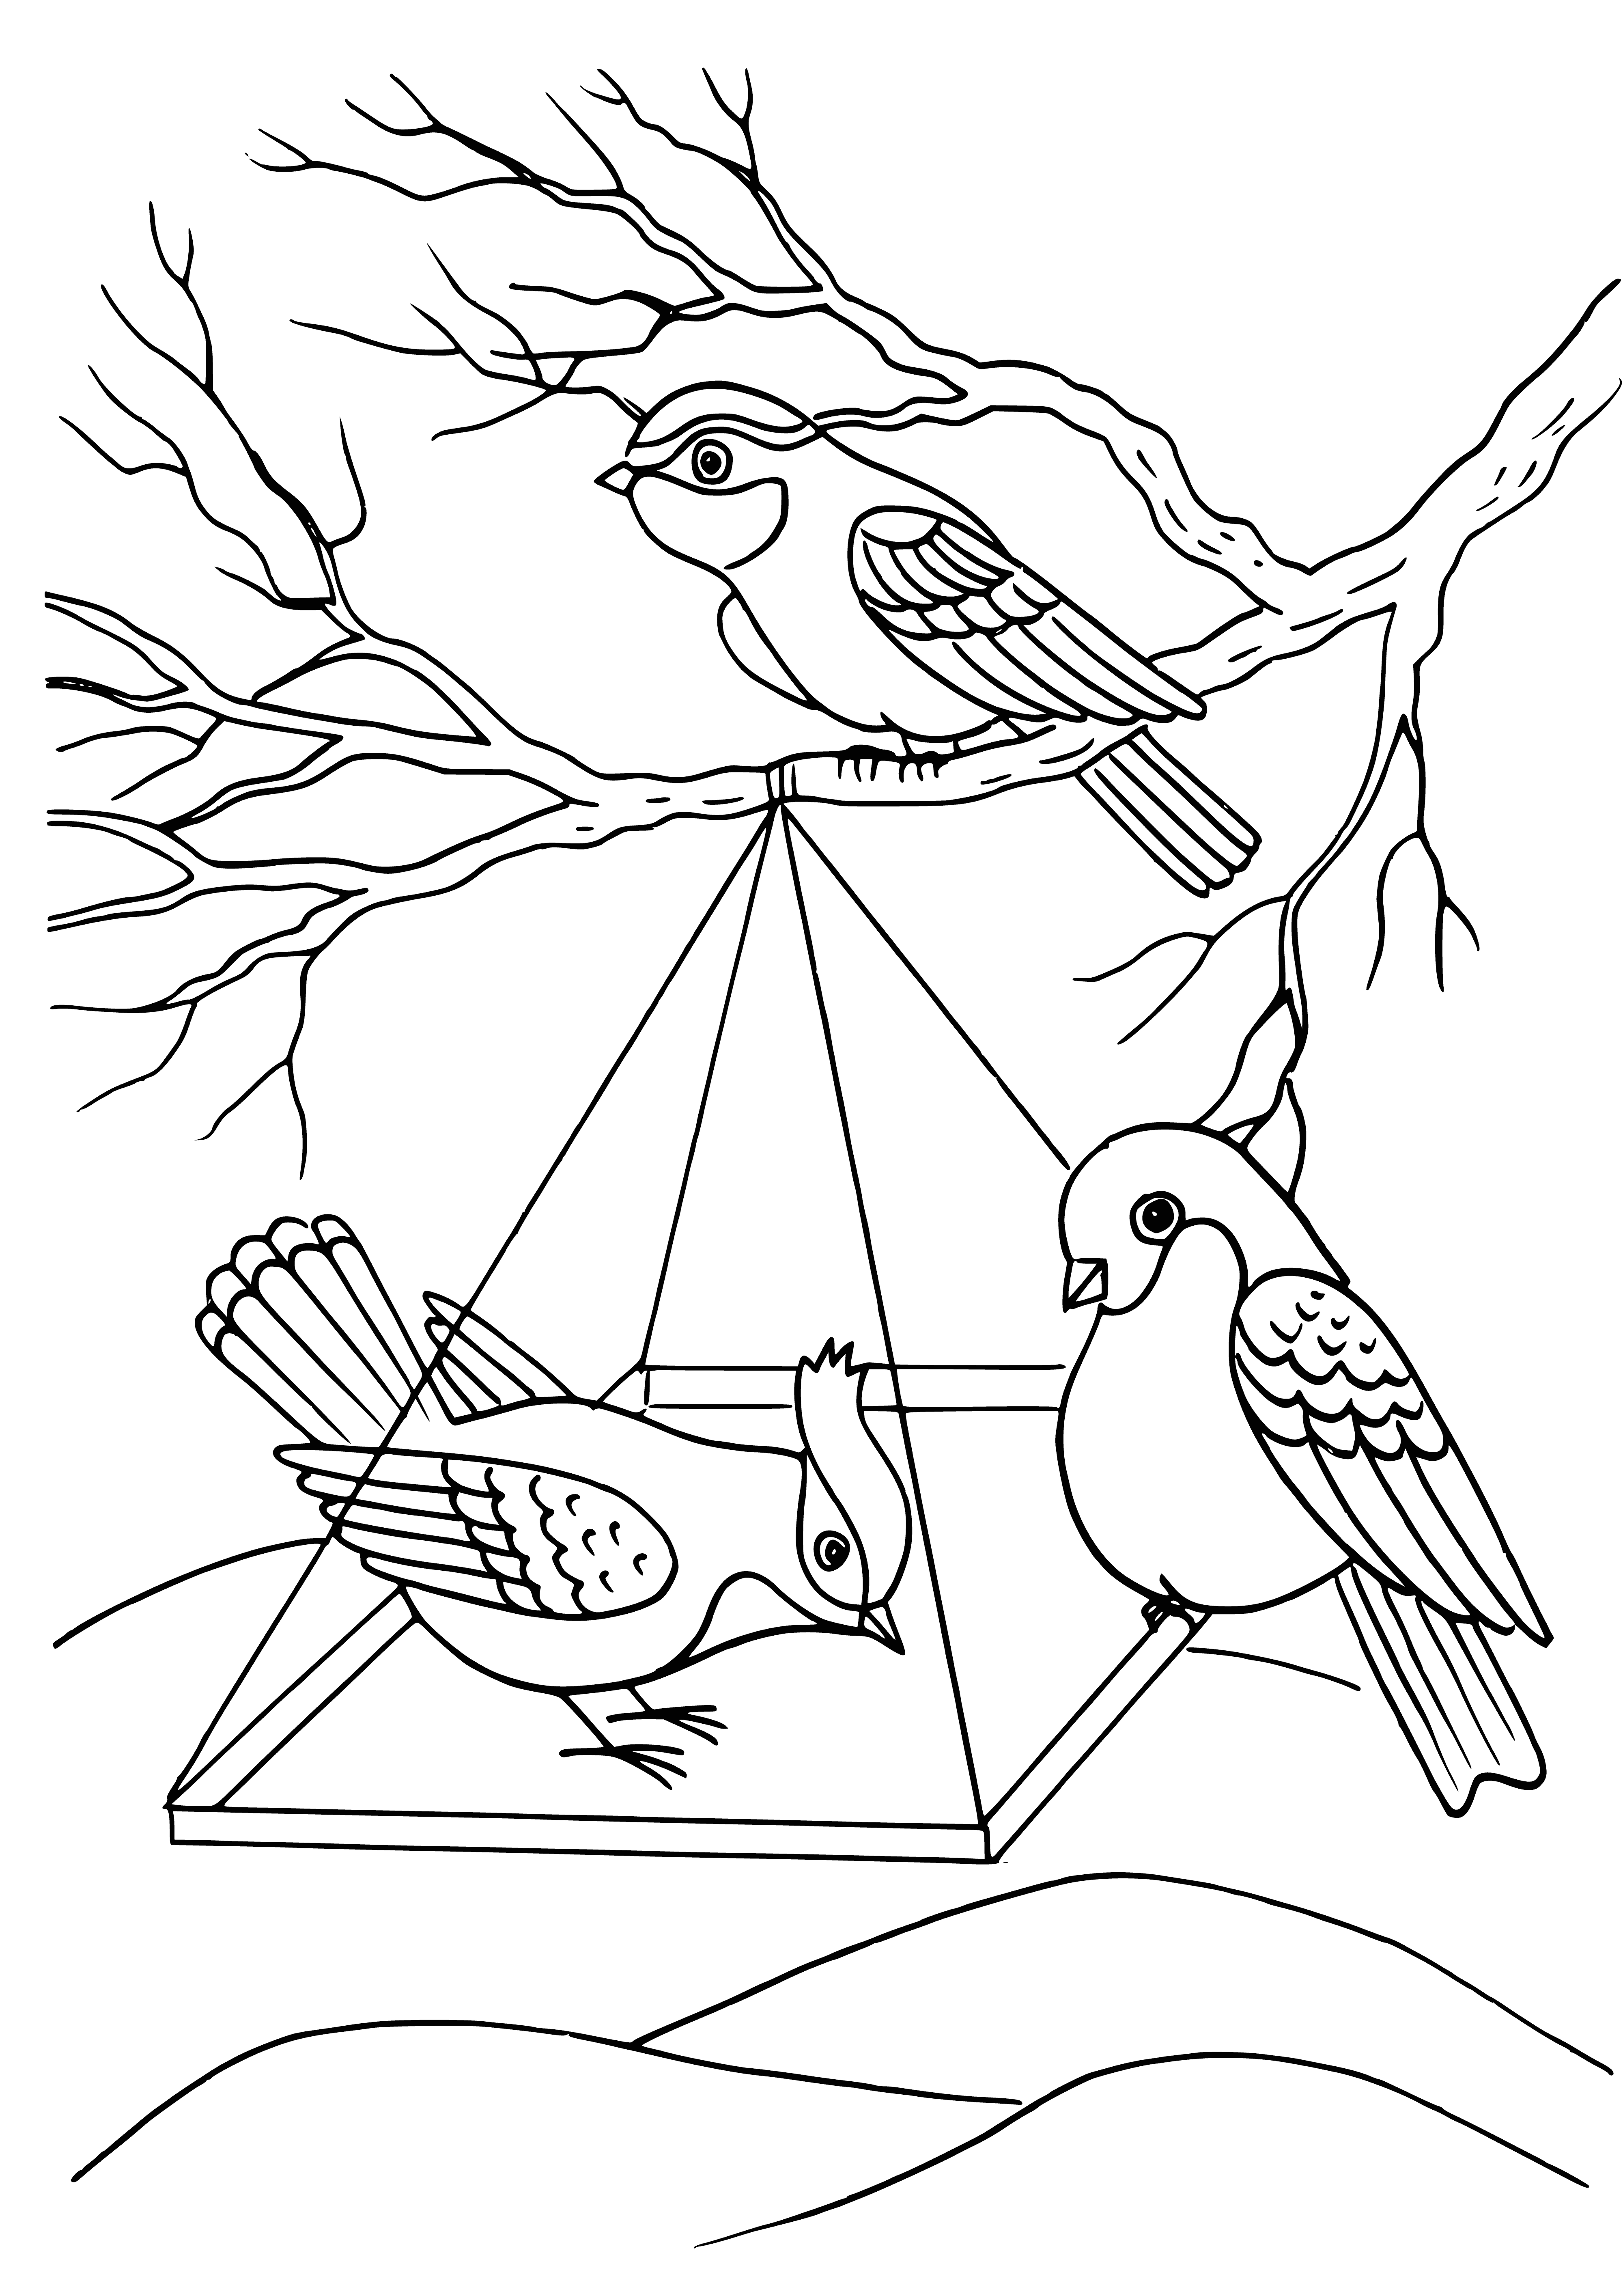 coloring page: 3 birds of different colors eat from a bird feeder outside a window. One is blue, one is brown, one is green.